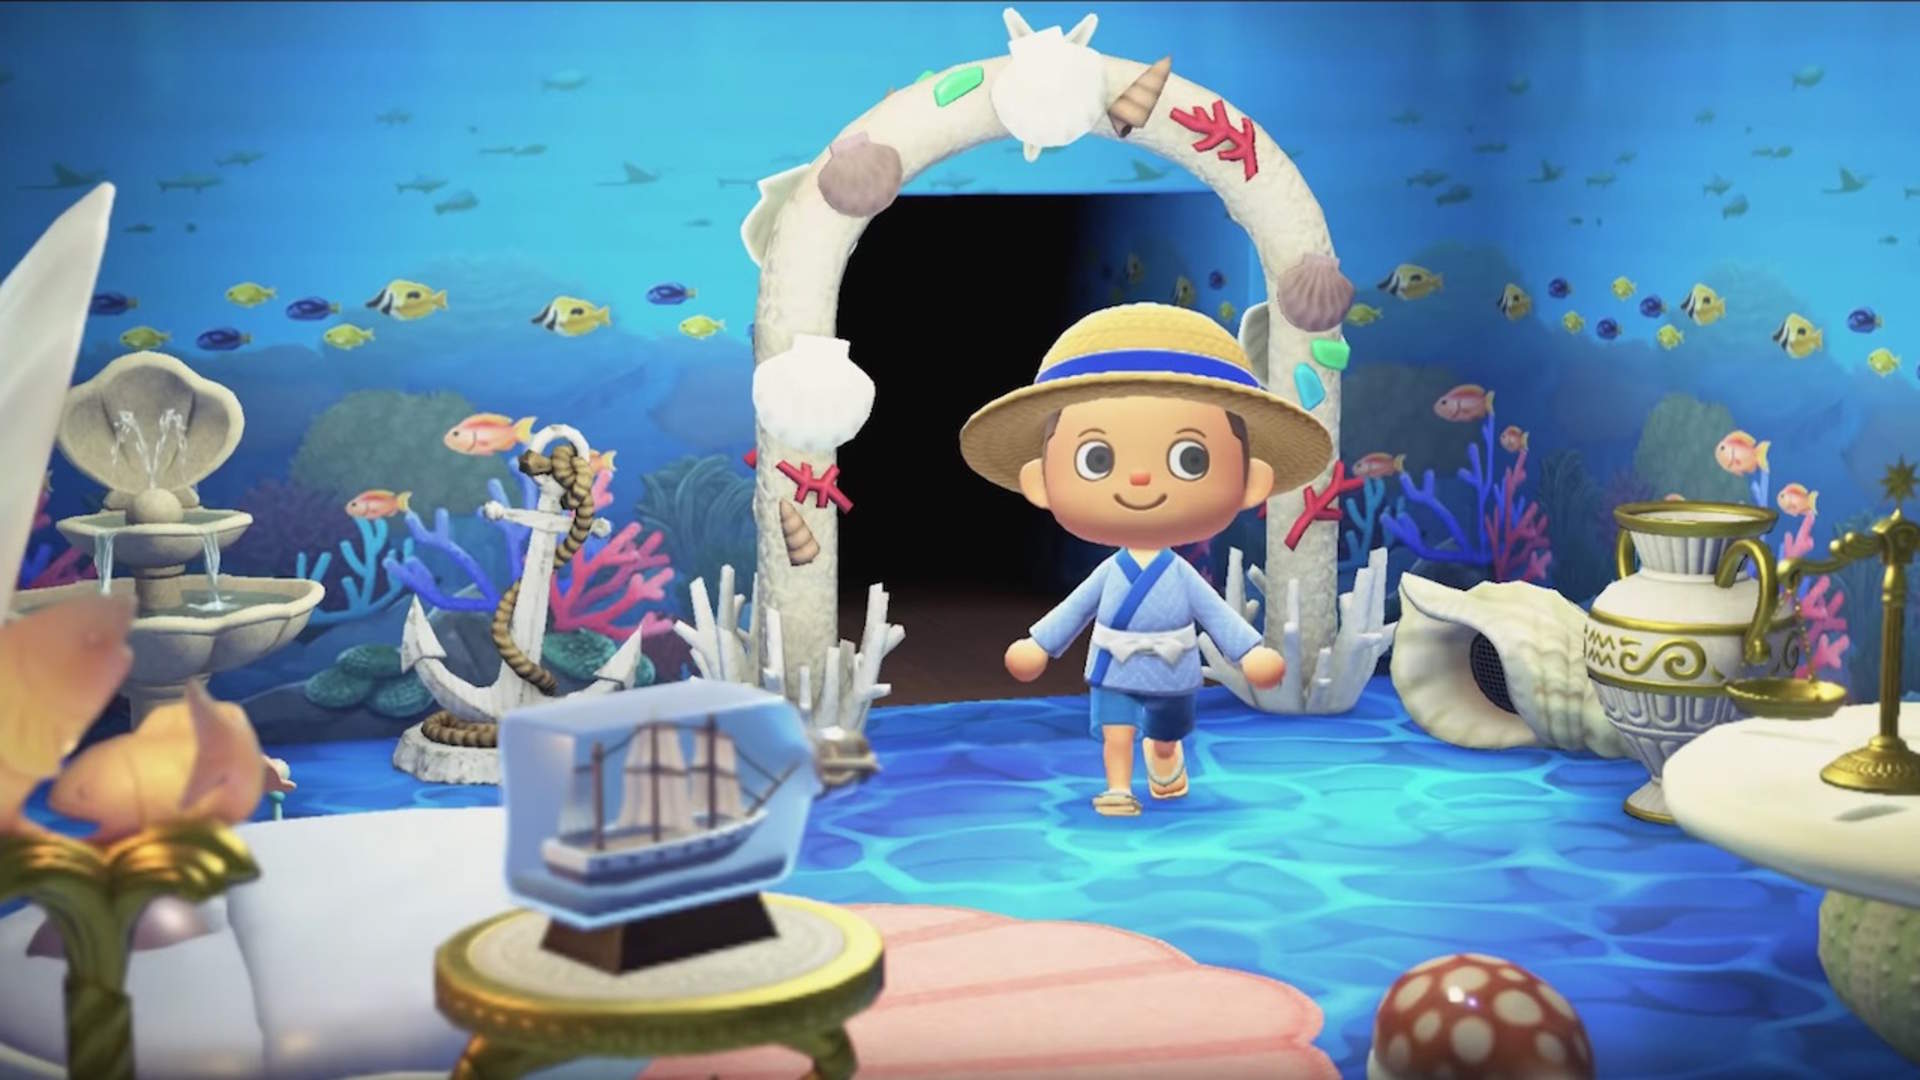 Animal Crossing: New Horizons Appears to Let You Decorate Your House With Animated Wallpaper